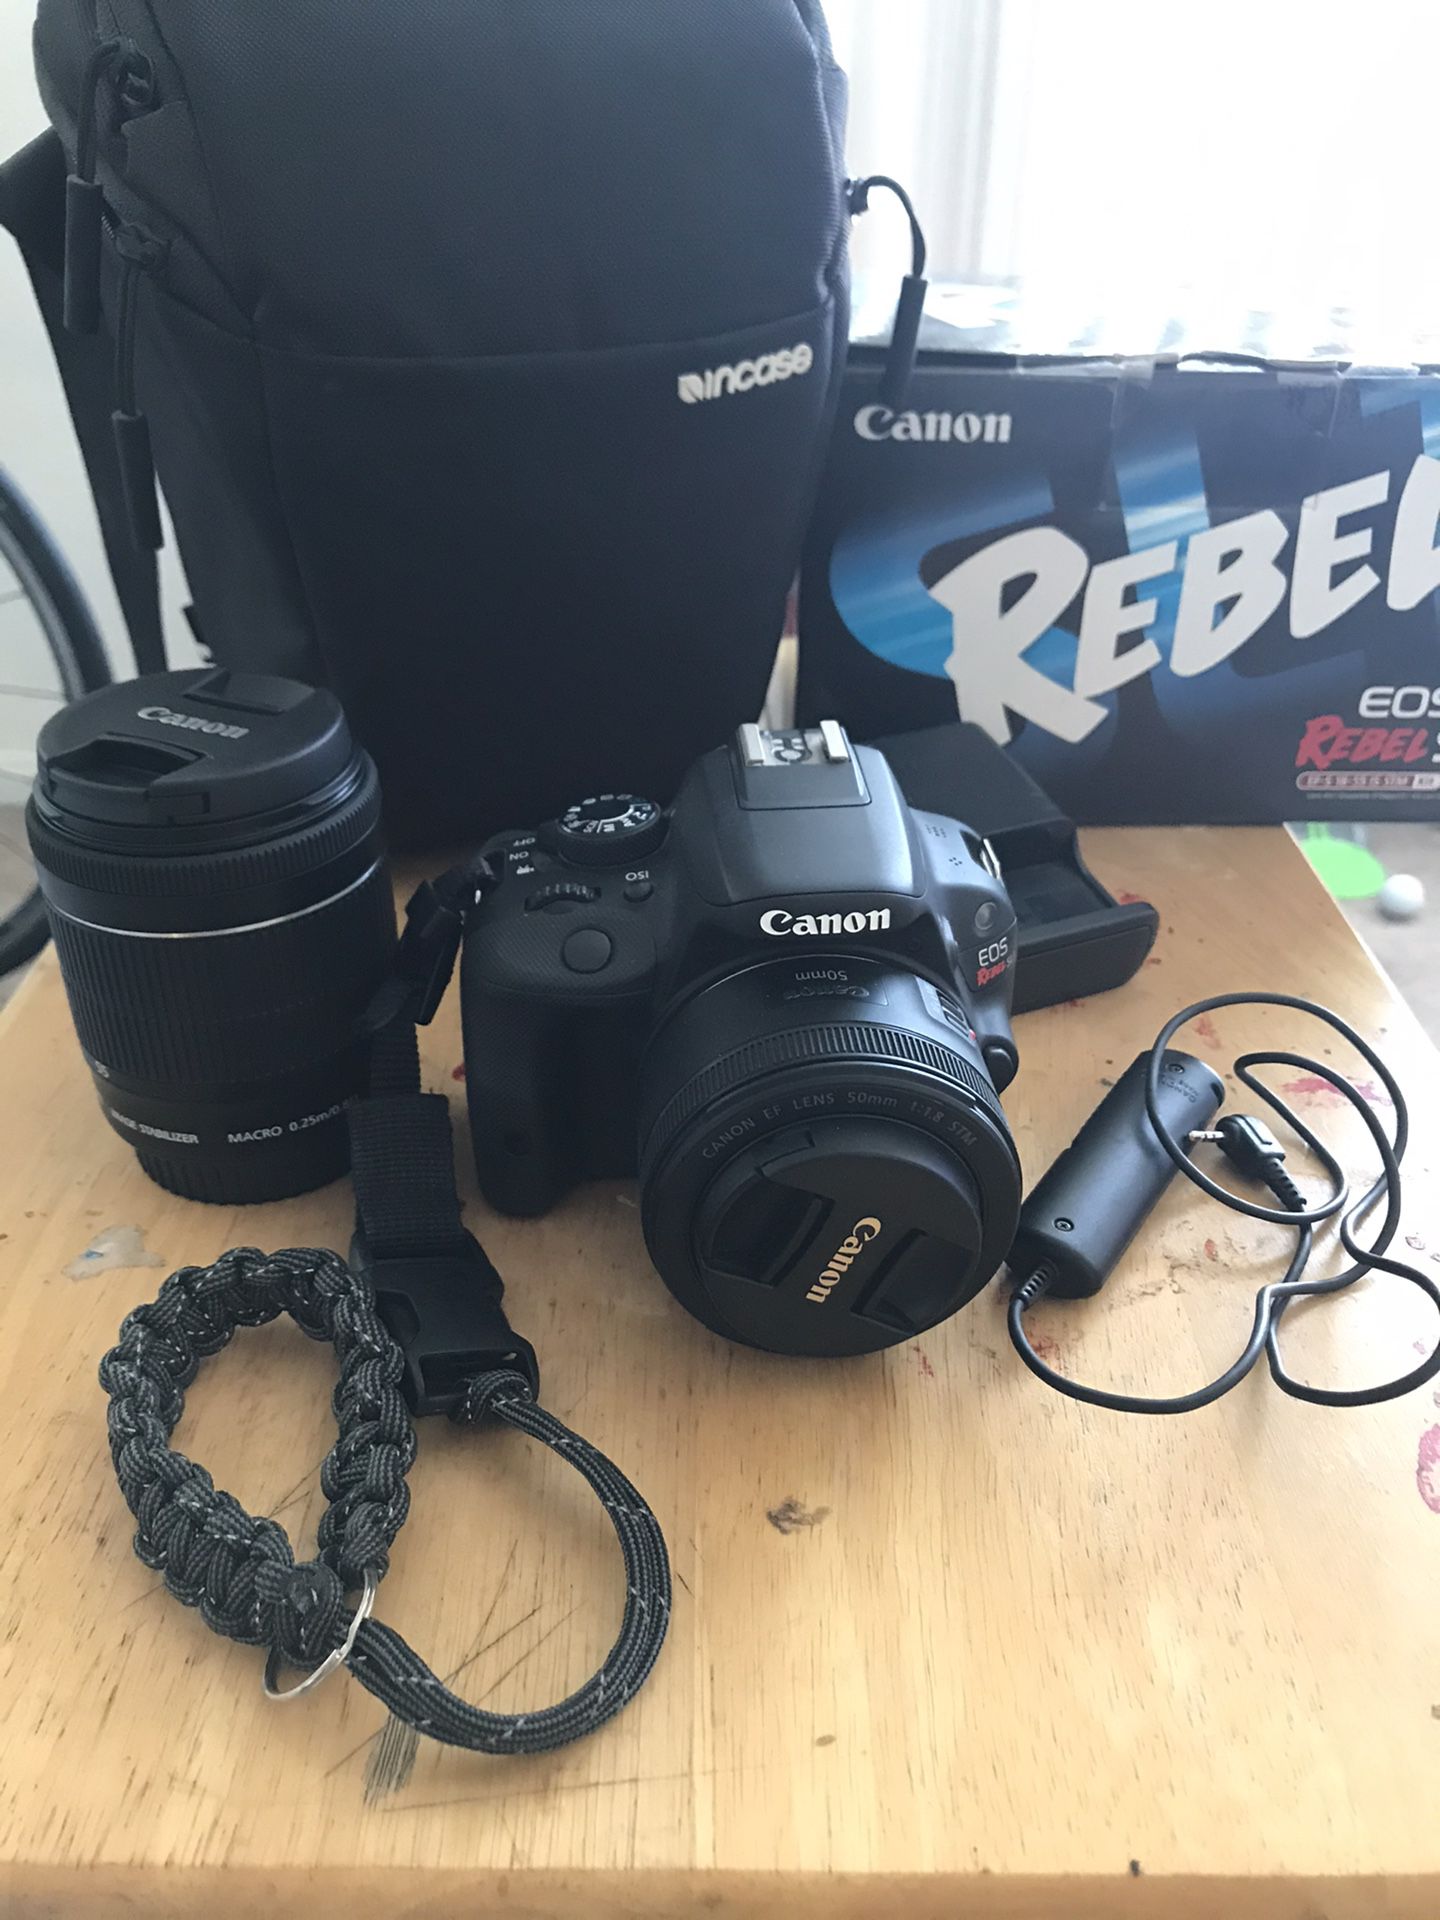 Canon Rebel SL1 with 50mm Canon EF Lens